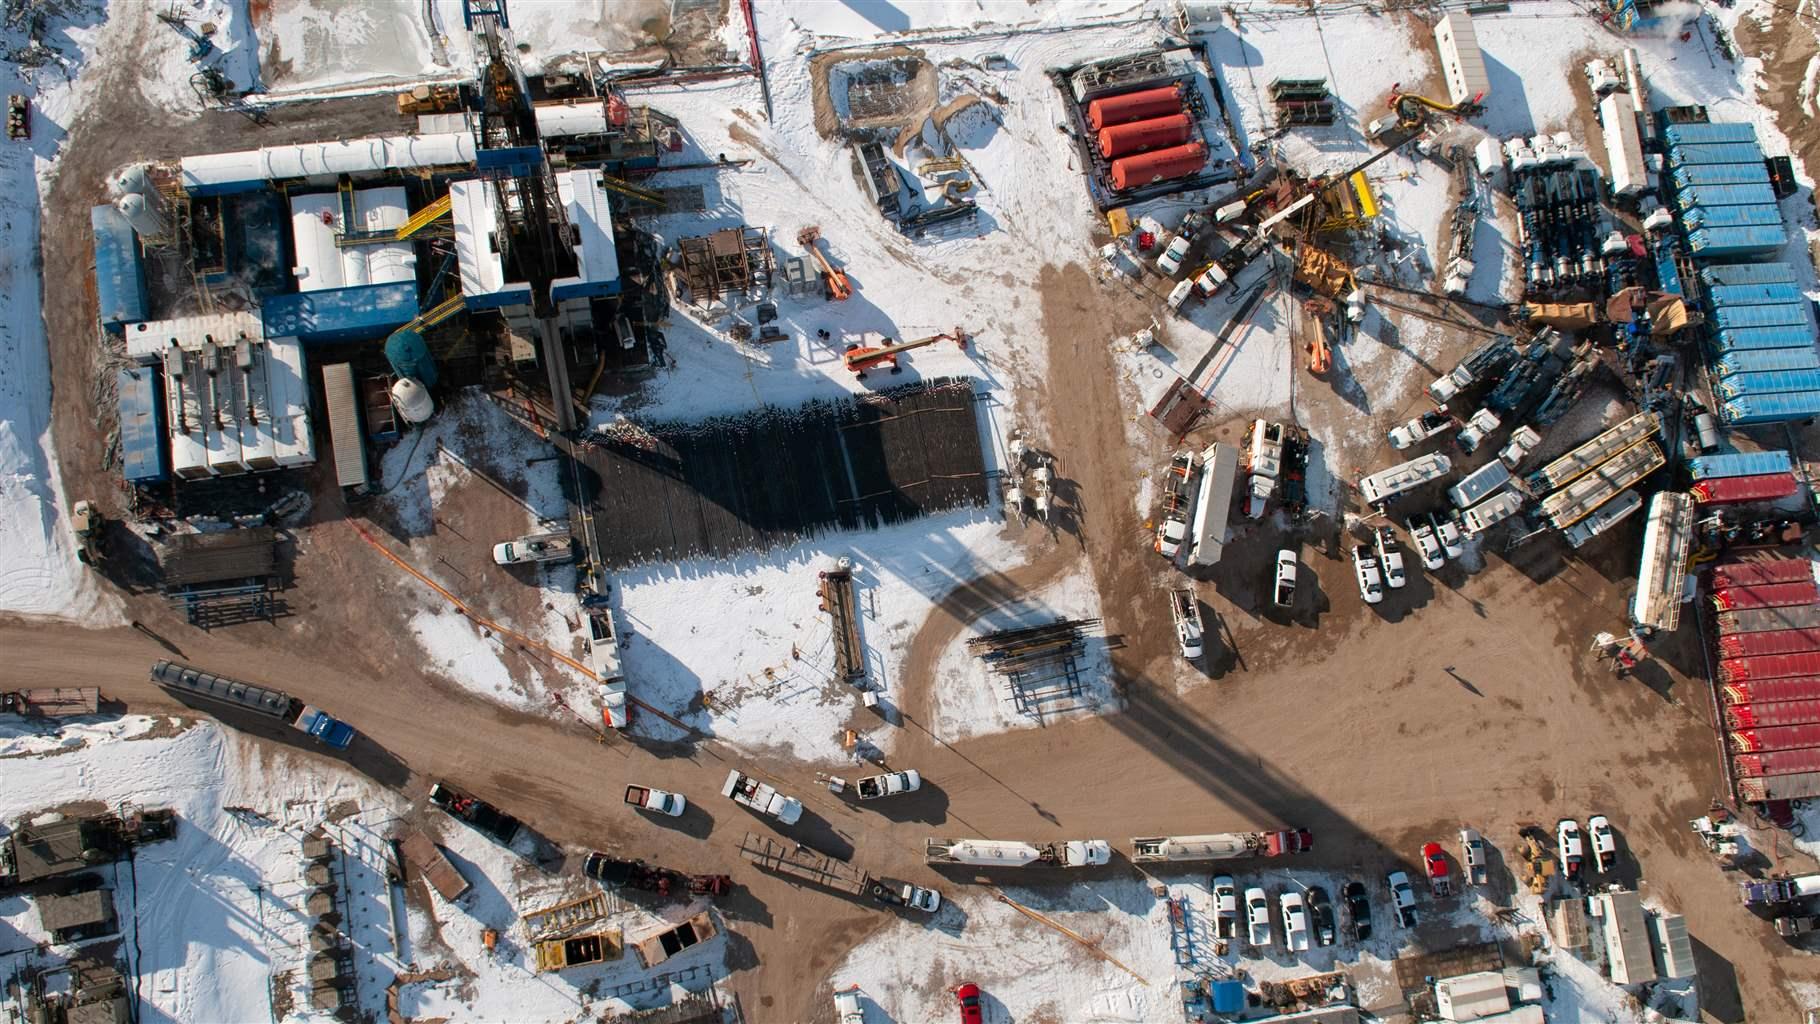 A close aerial view of a well pad, dusted with snow, with vehicles, drills, container boxes, and other equipment densely packed together.